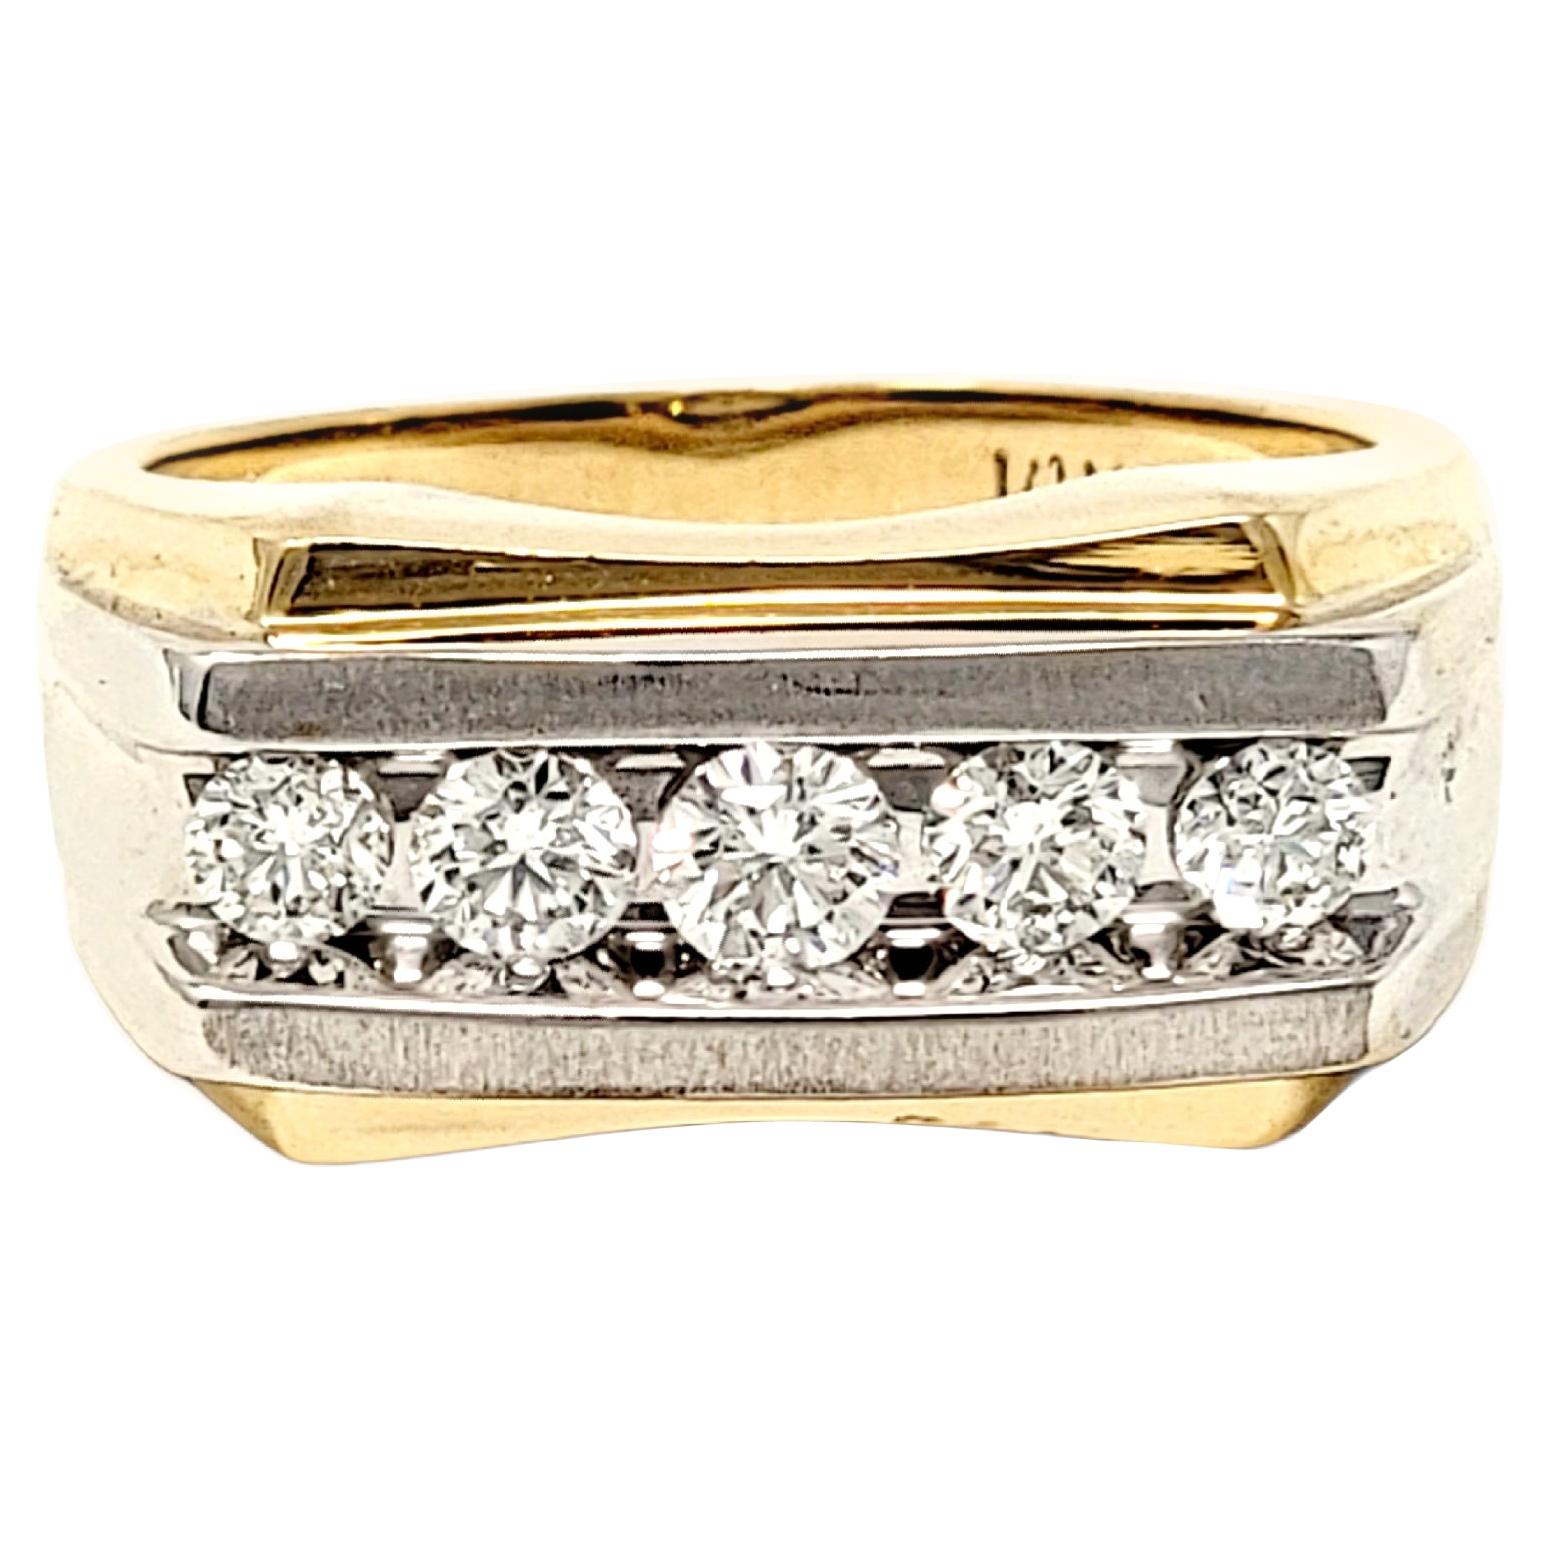 1.00 Carat Mens Channel Set Round Diamond Band Ring in Yellow and White Gold